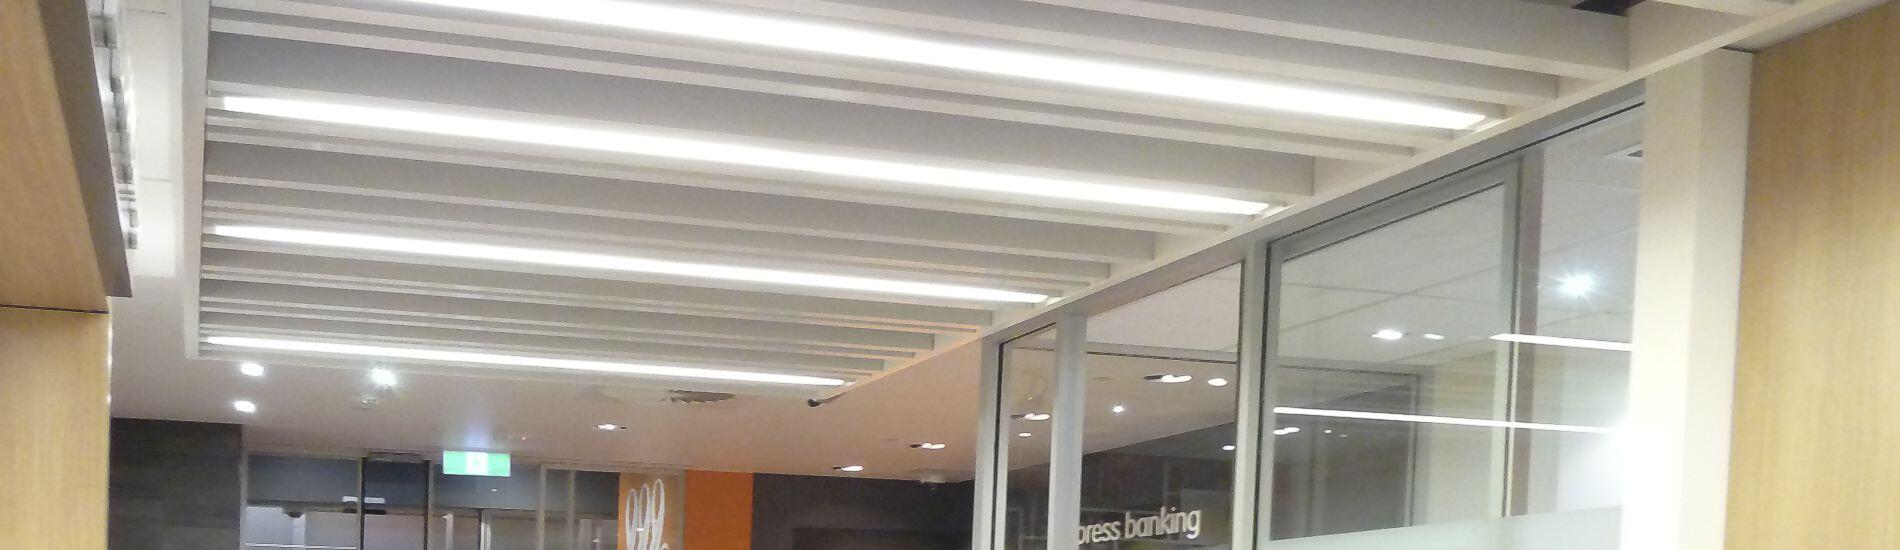 Decorative use of ALUCLICK aluminium beams with integrated lighting in retail bank